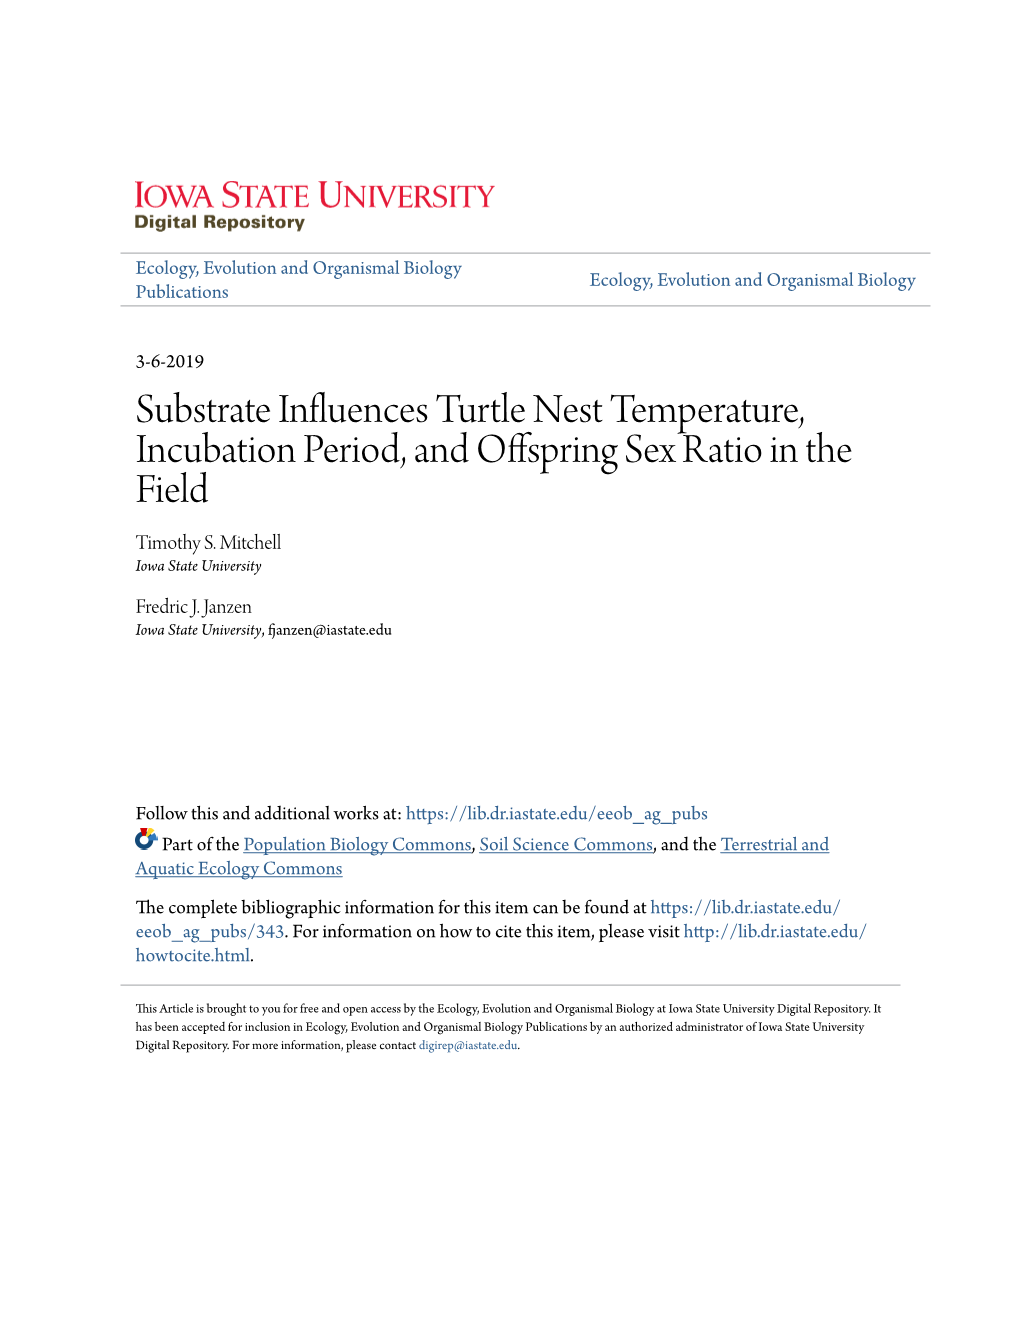 Substrate Influences Turtle Nest Temperature, Incubation Period, and Offspring Sex Ratio in the Field Timothy S